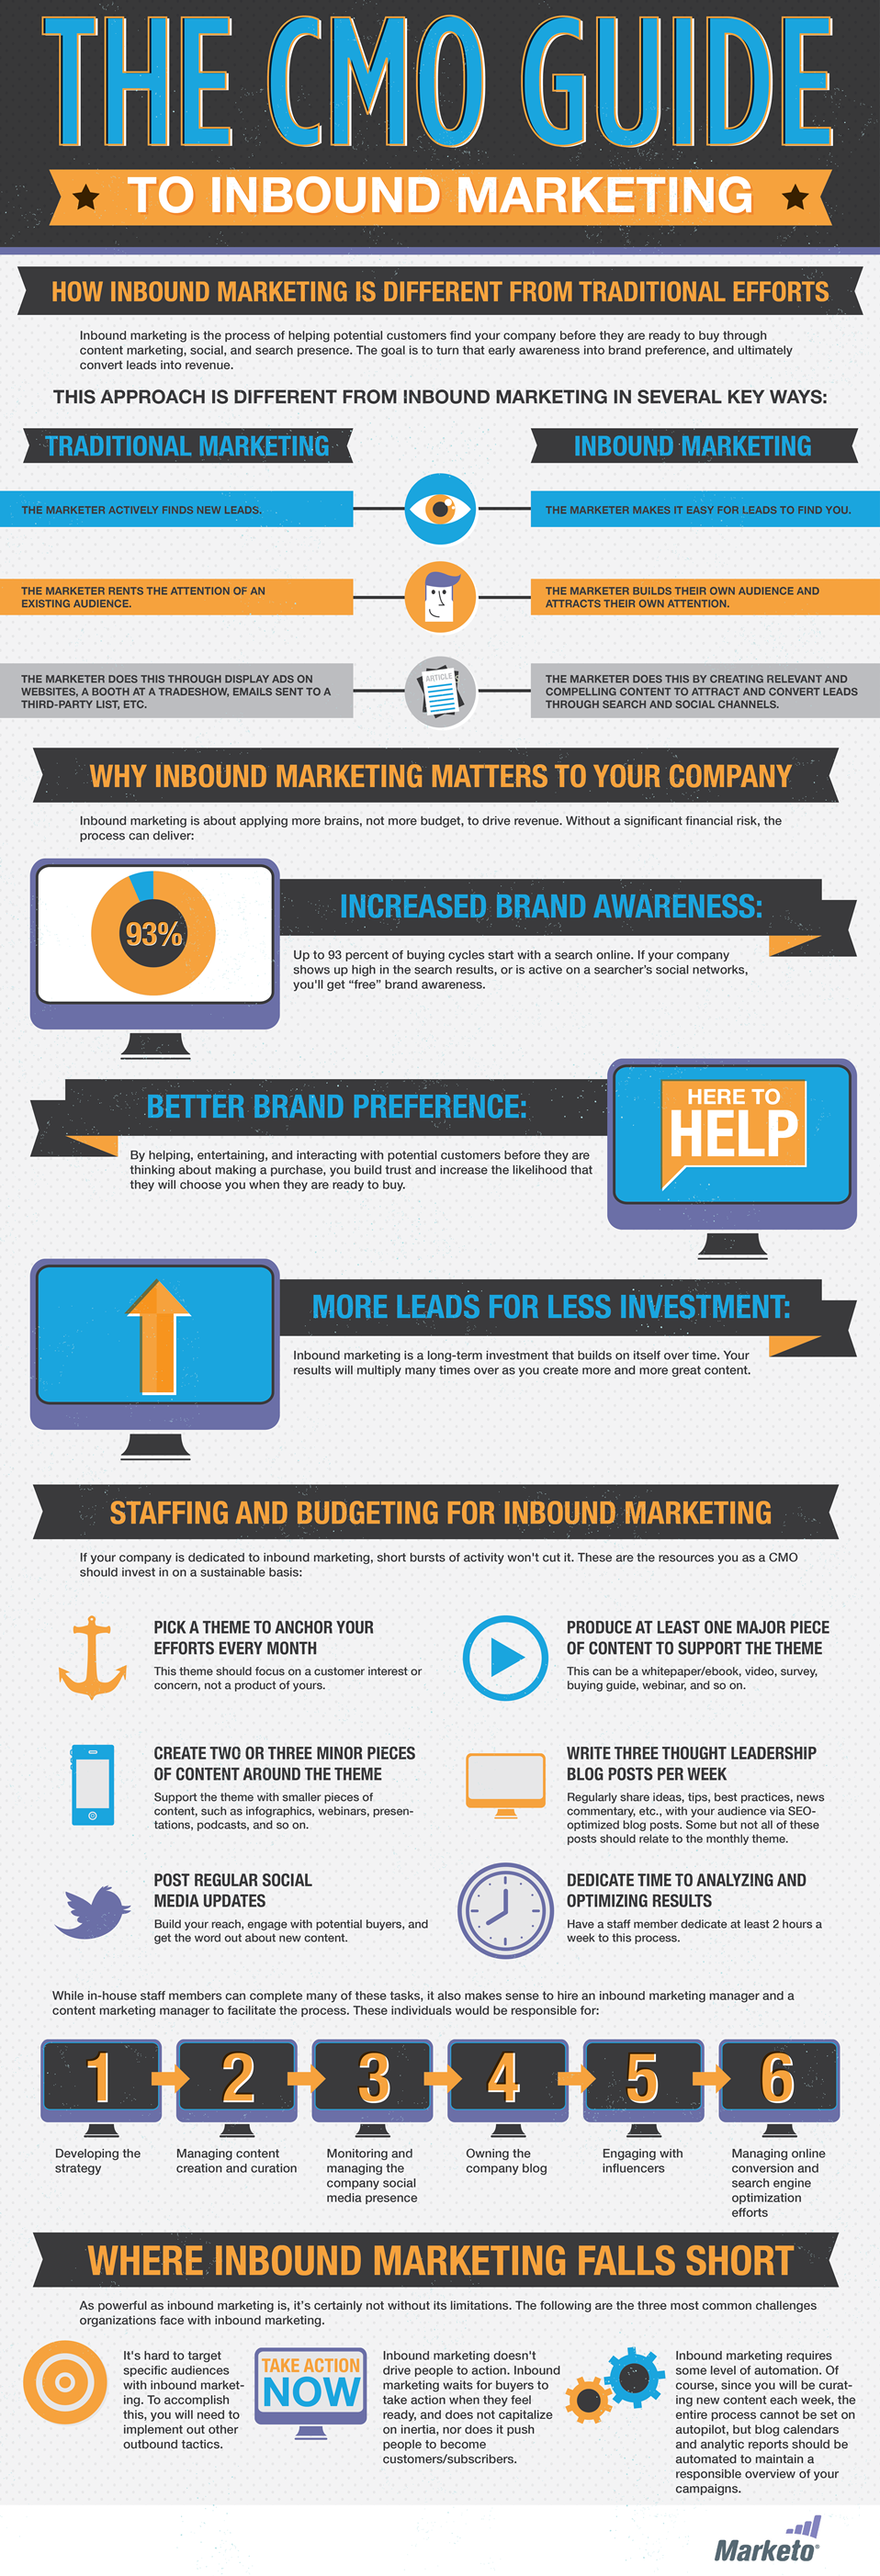 The CMO Guide to Inbound Marketing